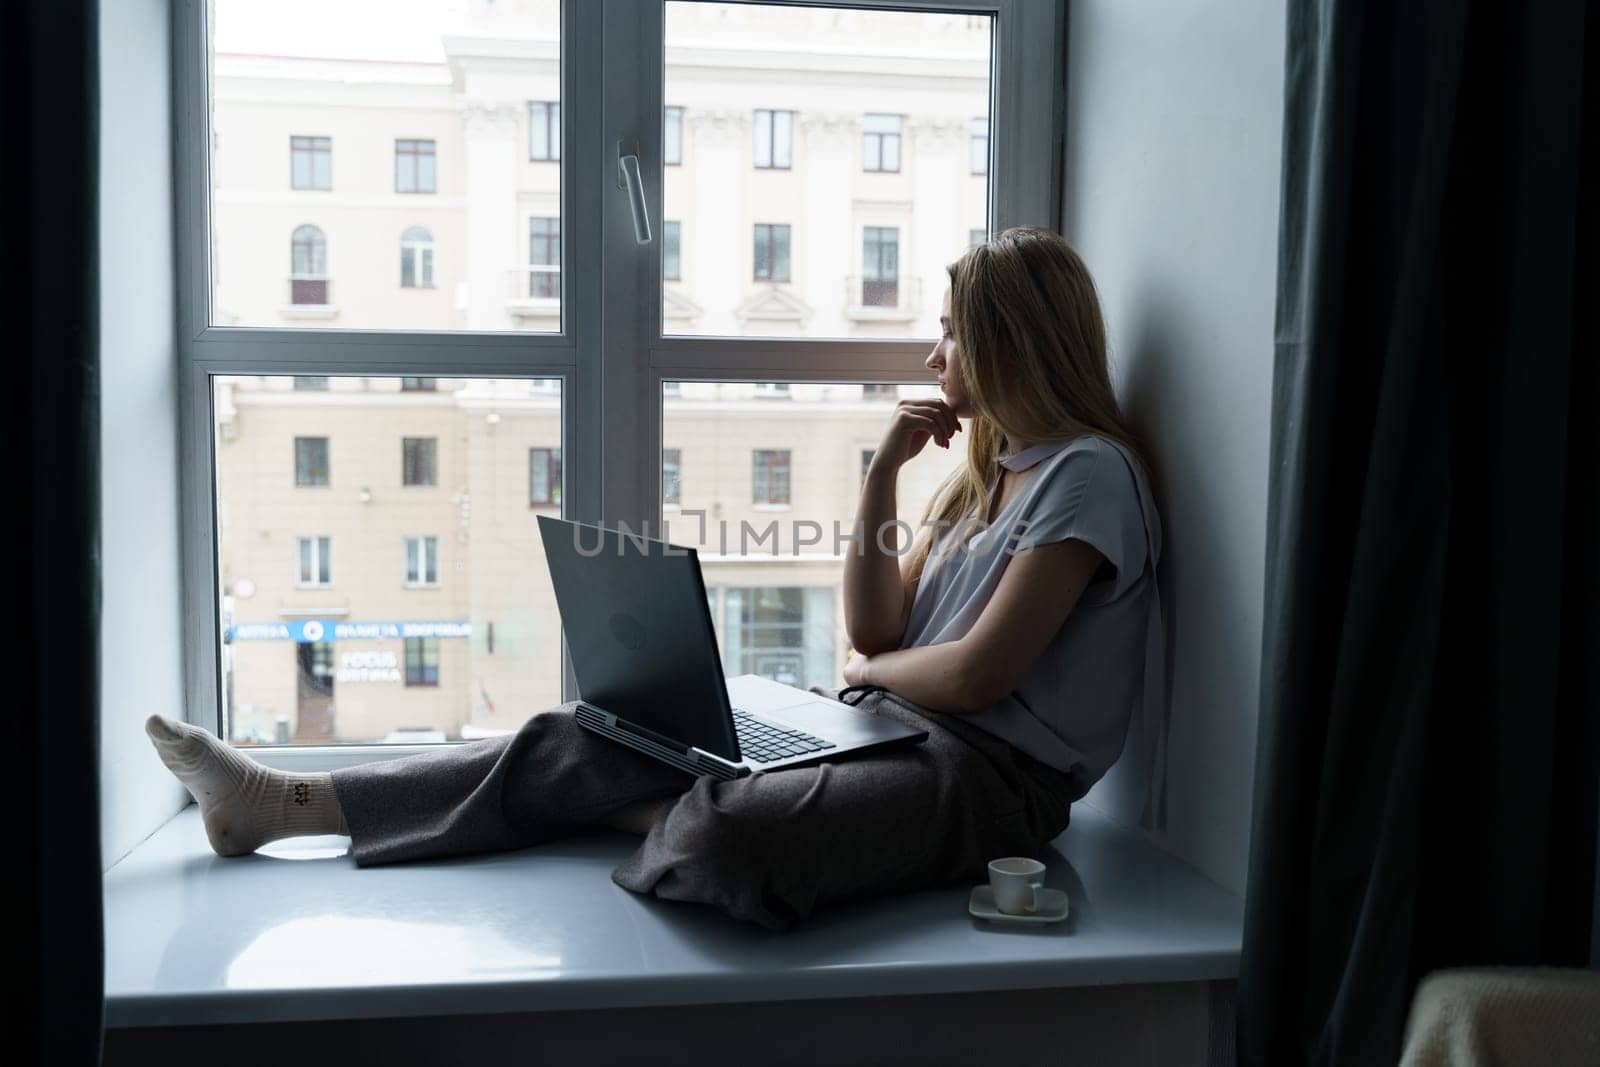 A young woman sits on a windowsill, works at a laptop, looks out the window. by Sd28DimoN_1976